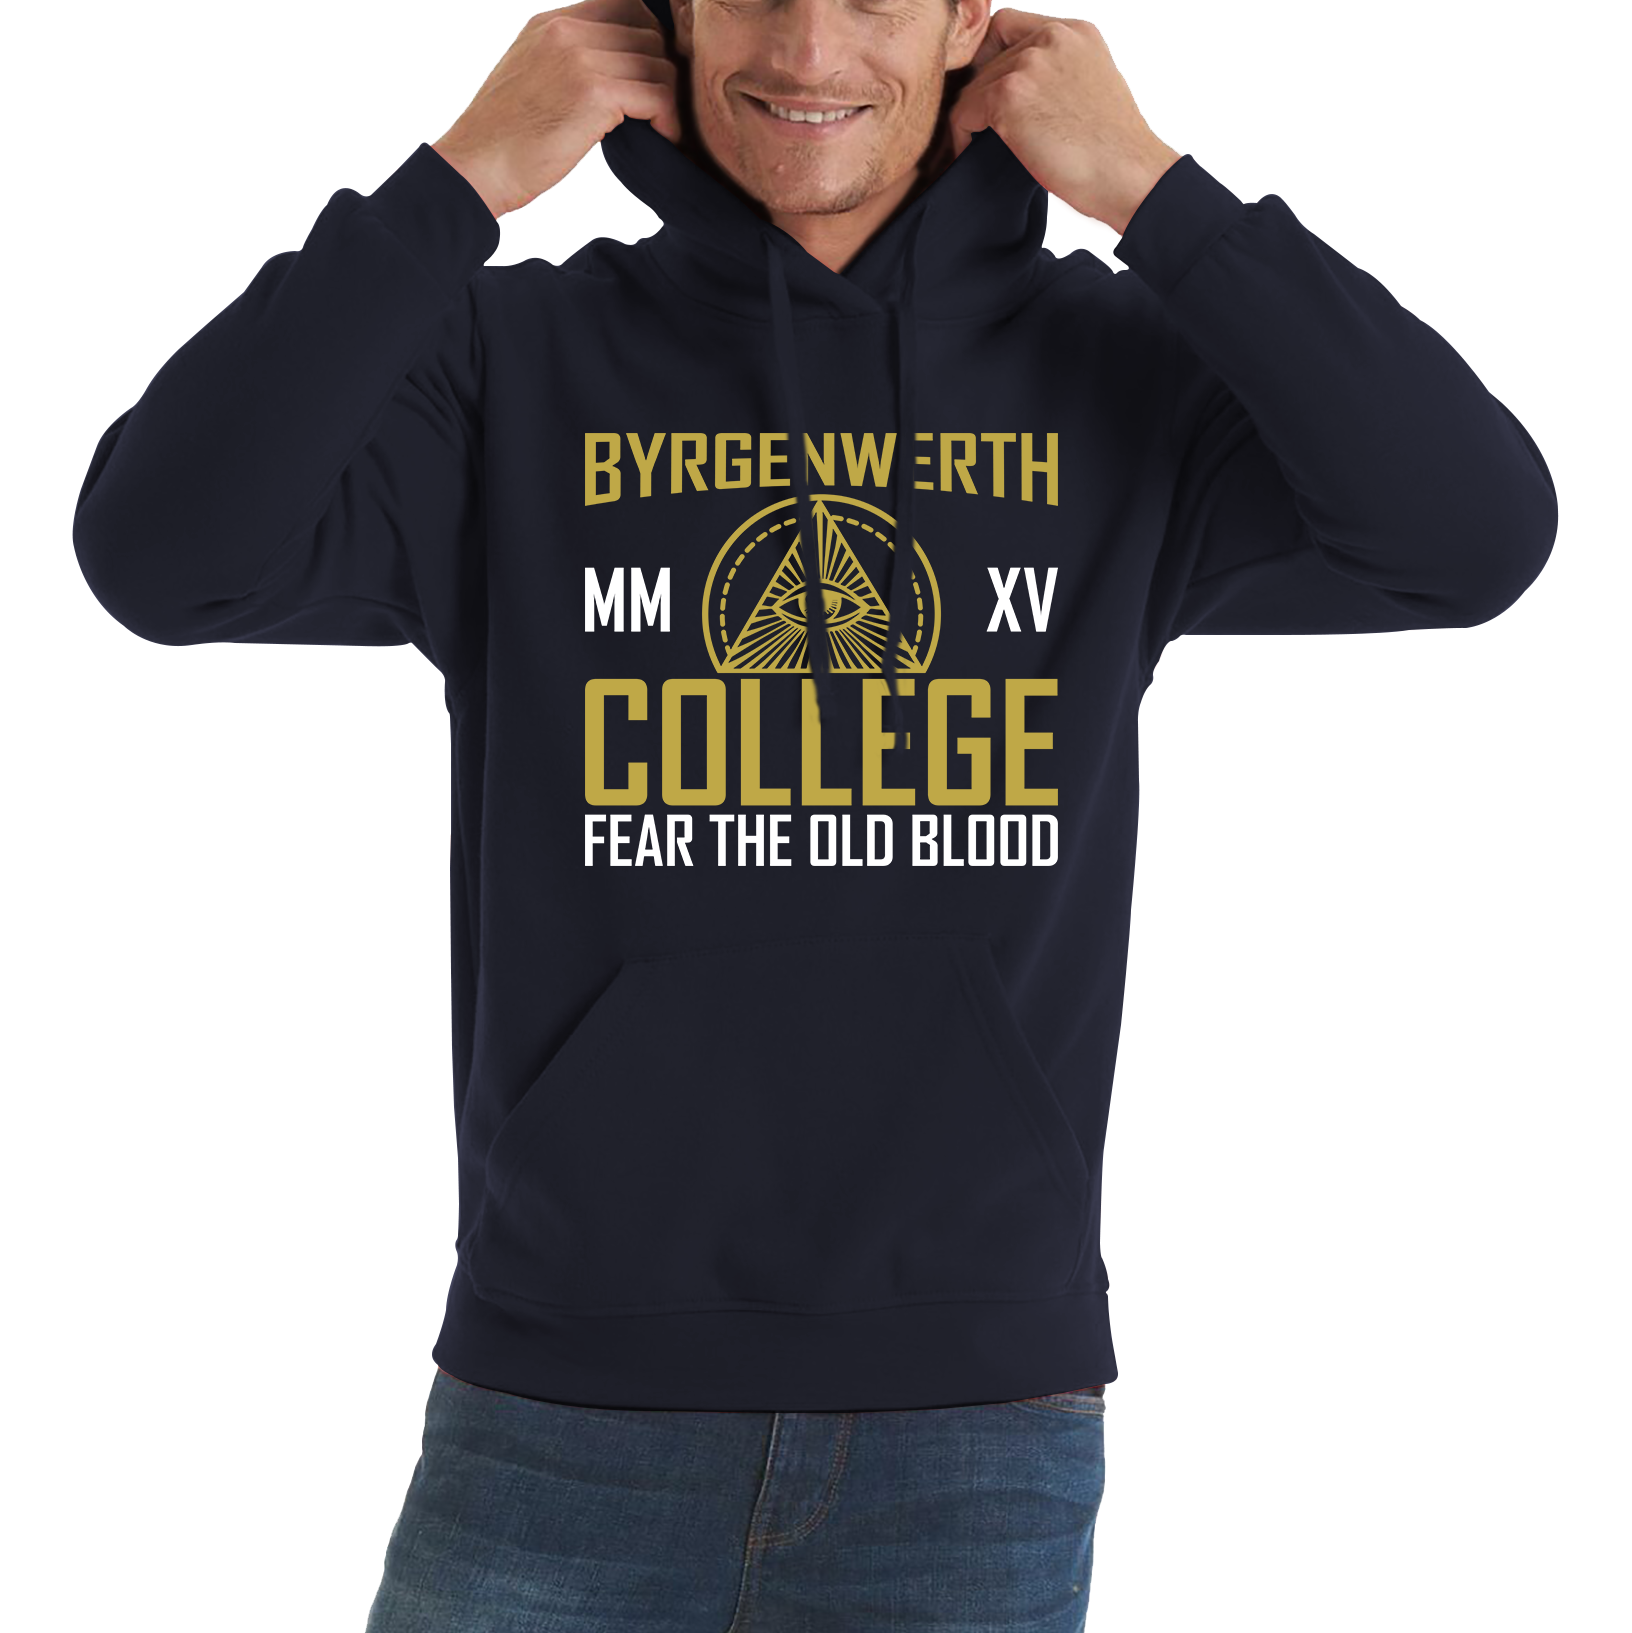 Byrgenwerth MM XV College Fear The Old Blood Adult Hoodie